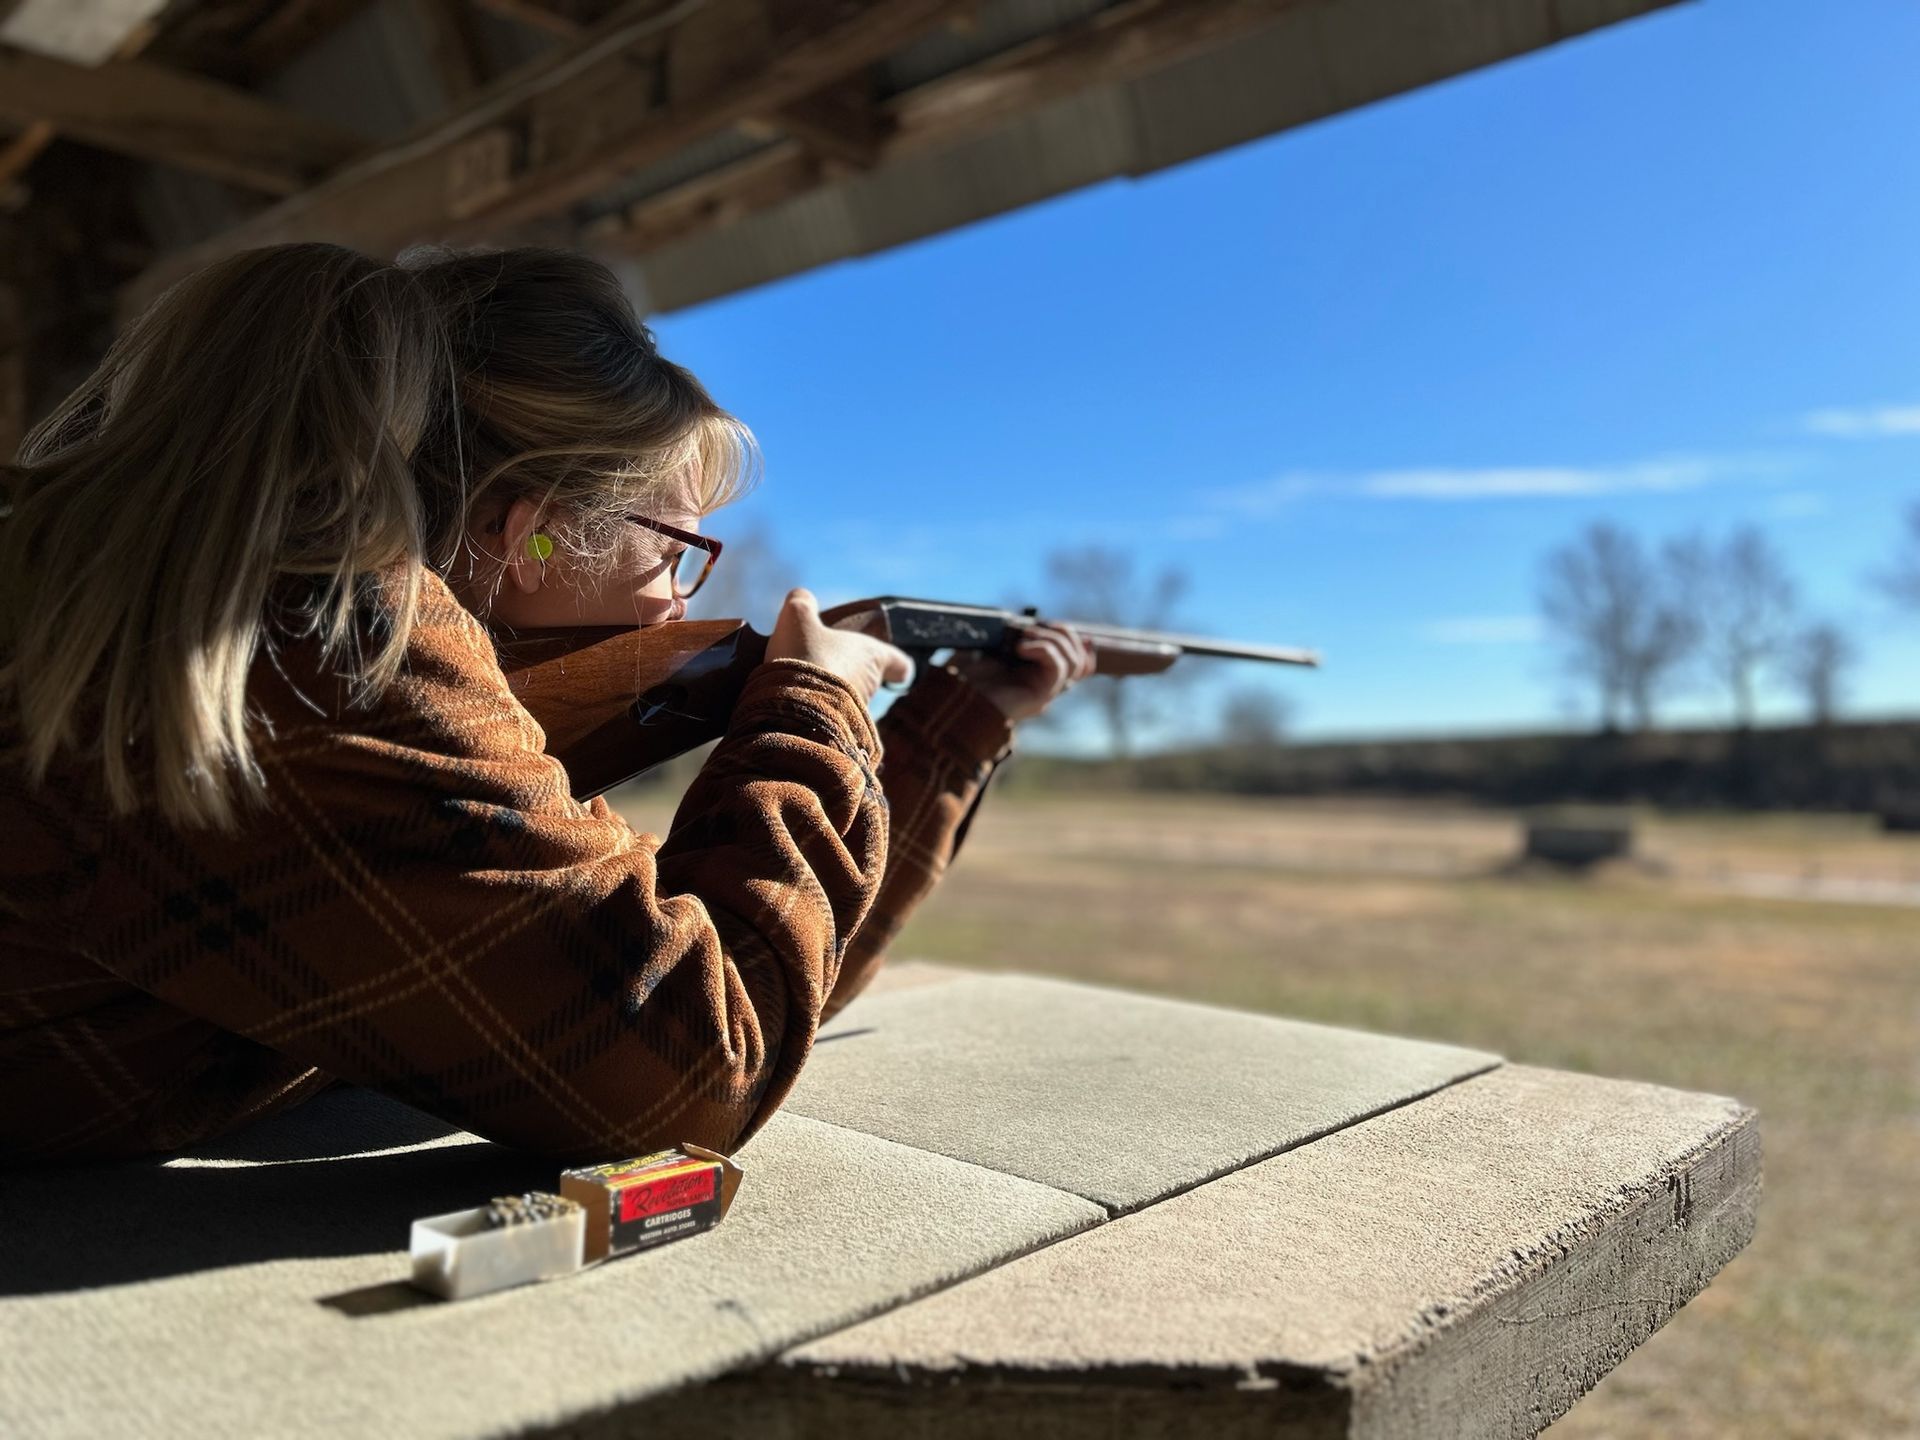 woman taking aim with a rifle while leaning on table at gun range